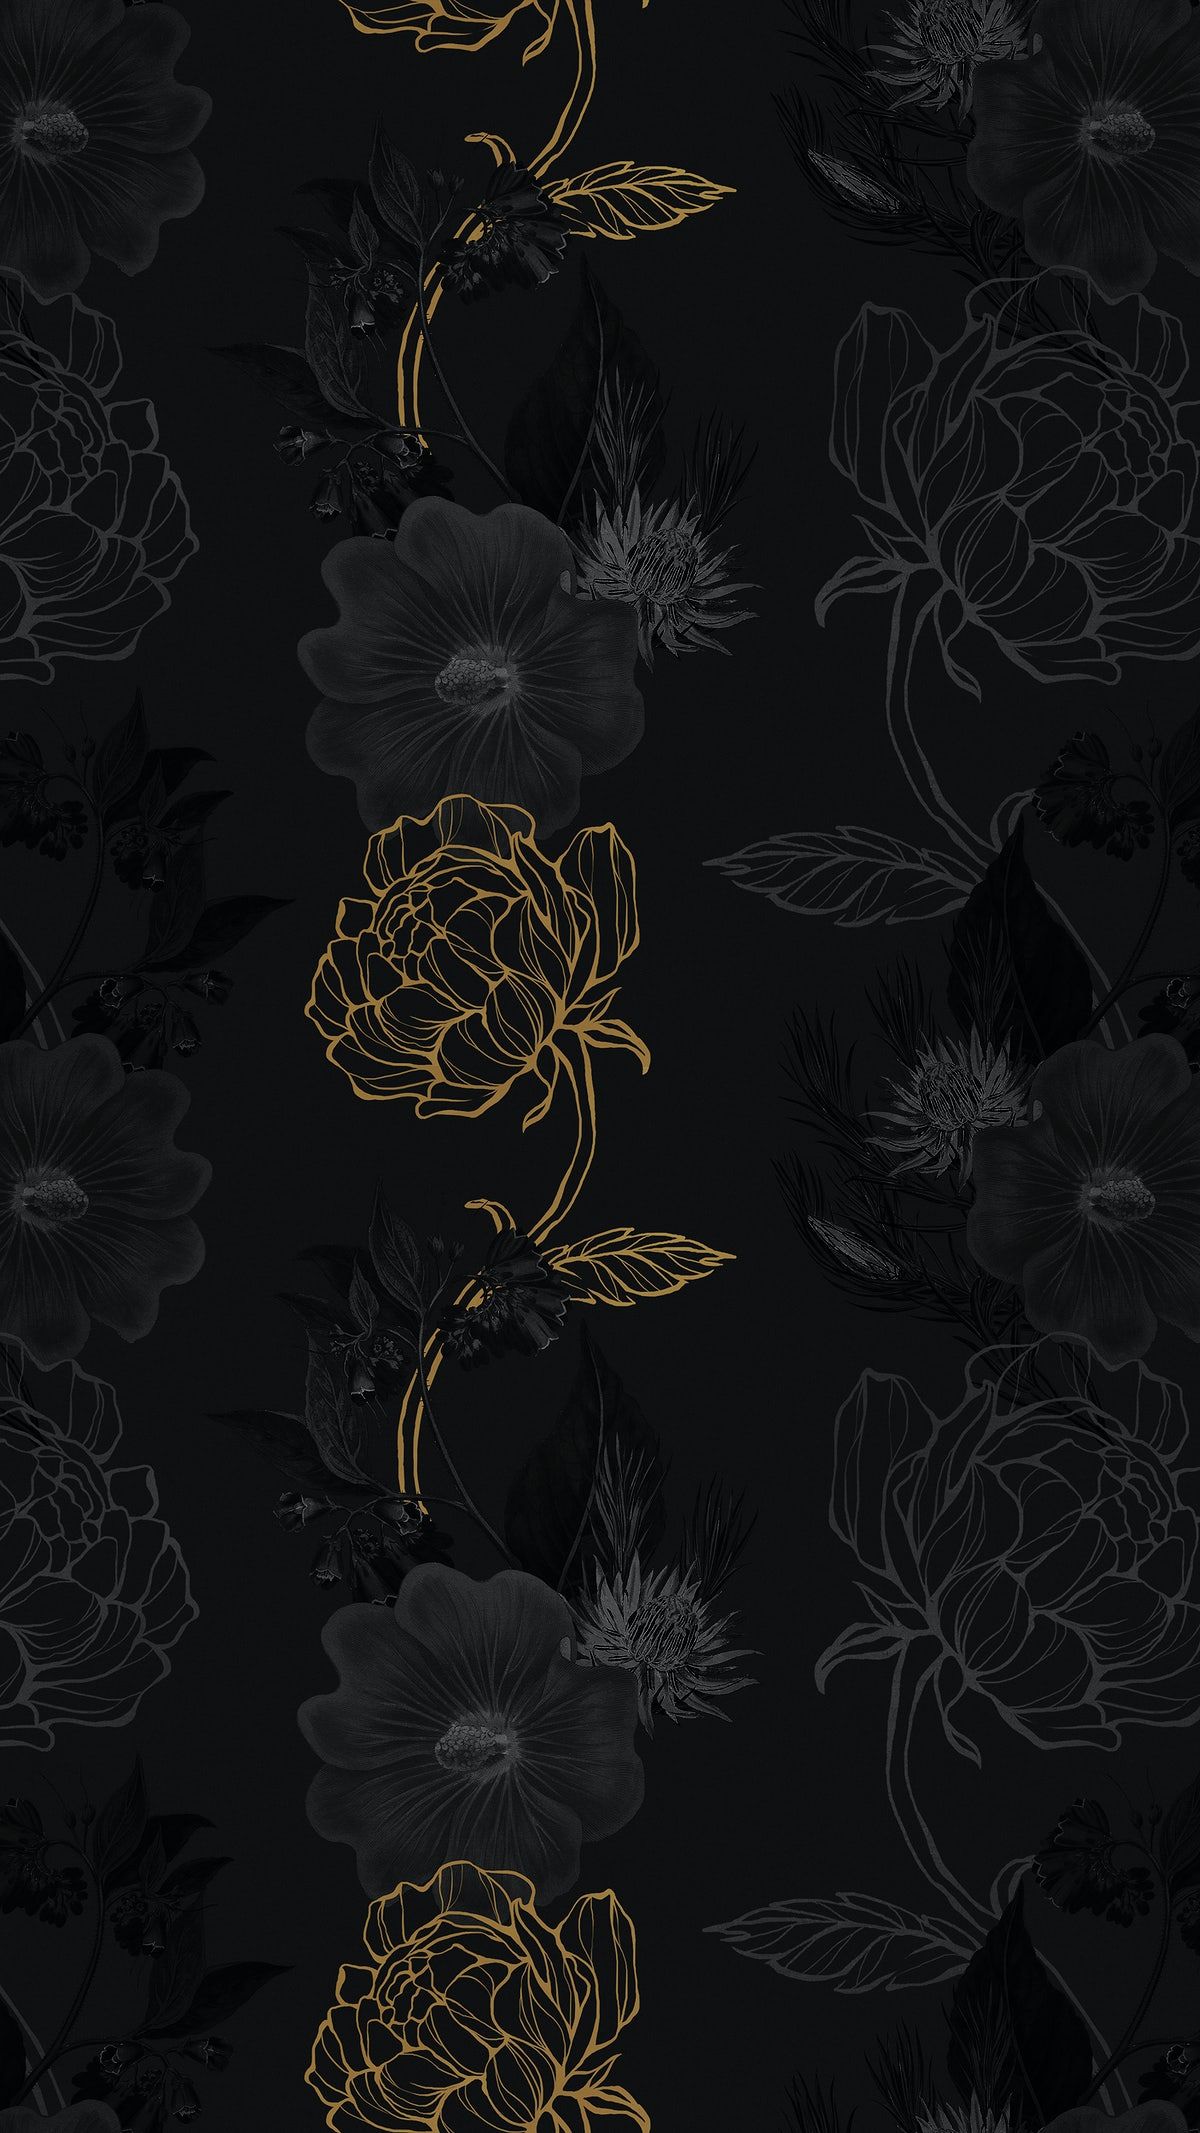 Download premium image of Hand drawn black and gold flower pattern on a dark bac